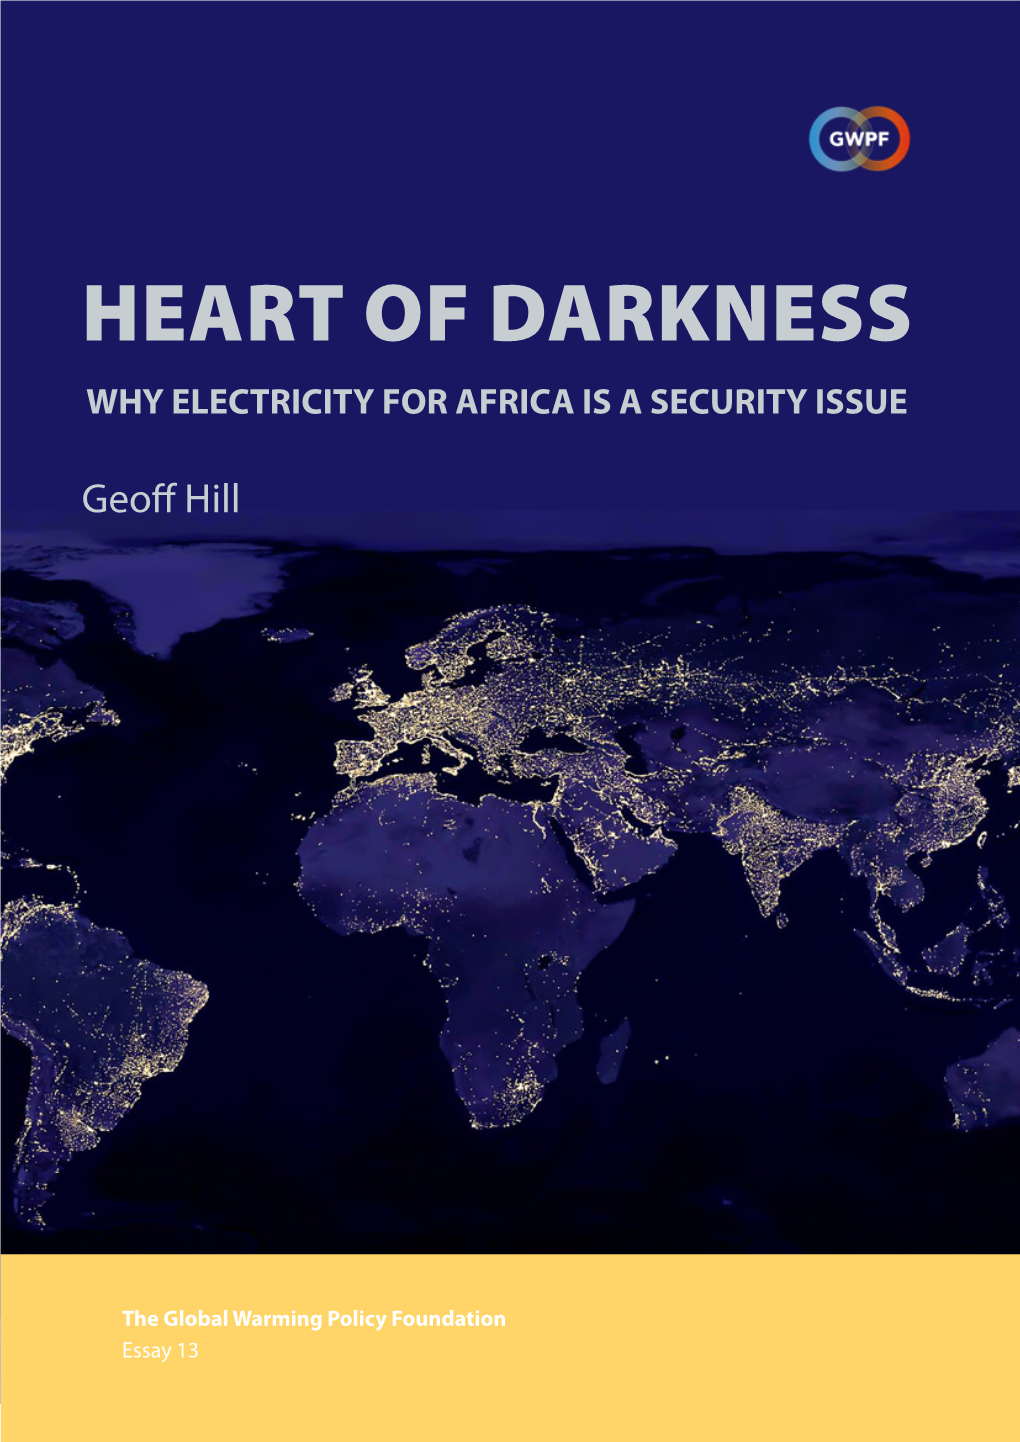 Heart of Darkness: Why Electricity for Africa Is a Security Issue Geoff Hill Essay 13, the Global Warming Policy Foundation